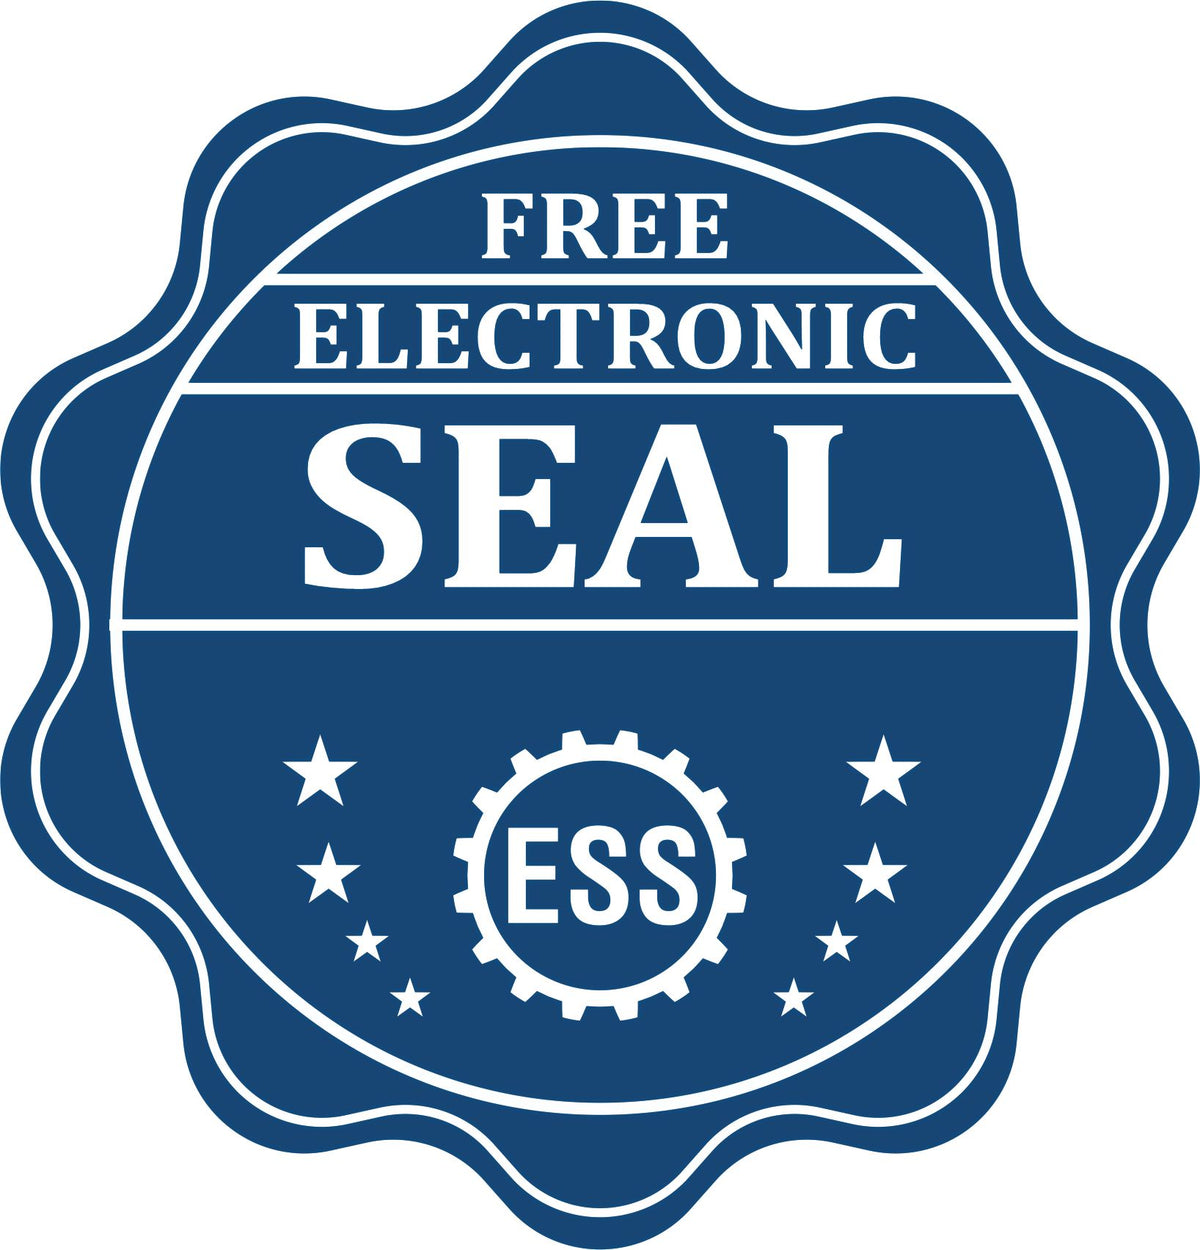 A badge showing a free electronic seal for the Gift Tennessee Geologist Seal with stars and the ESS gear on the emblem.